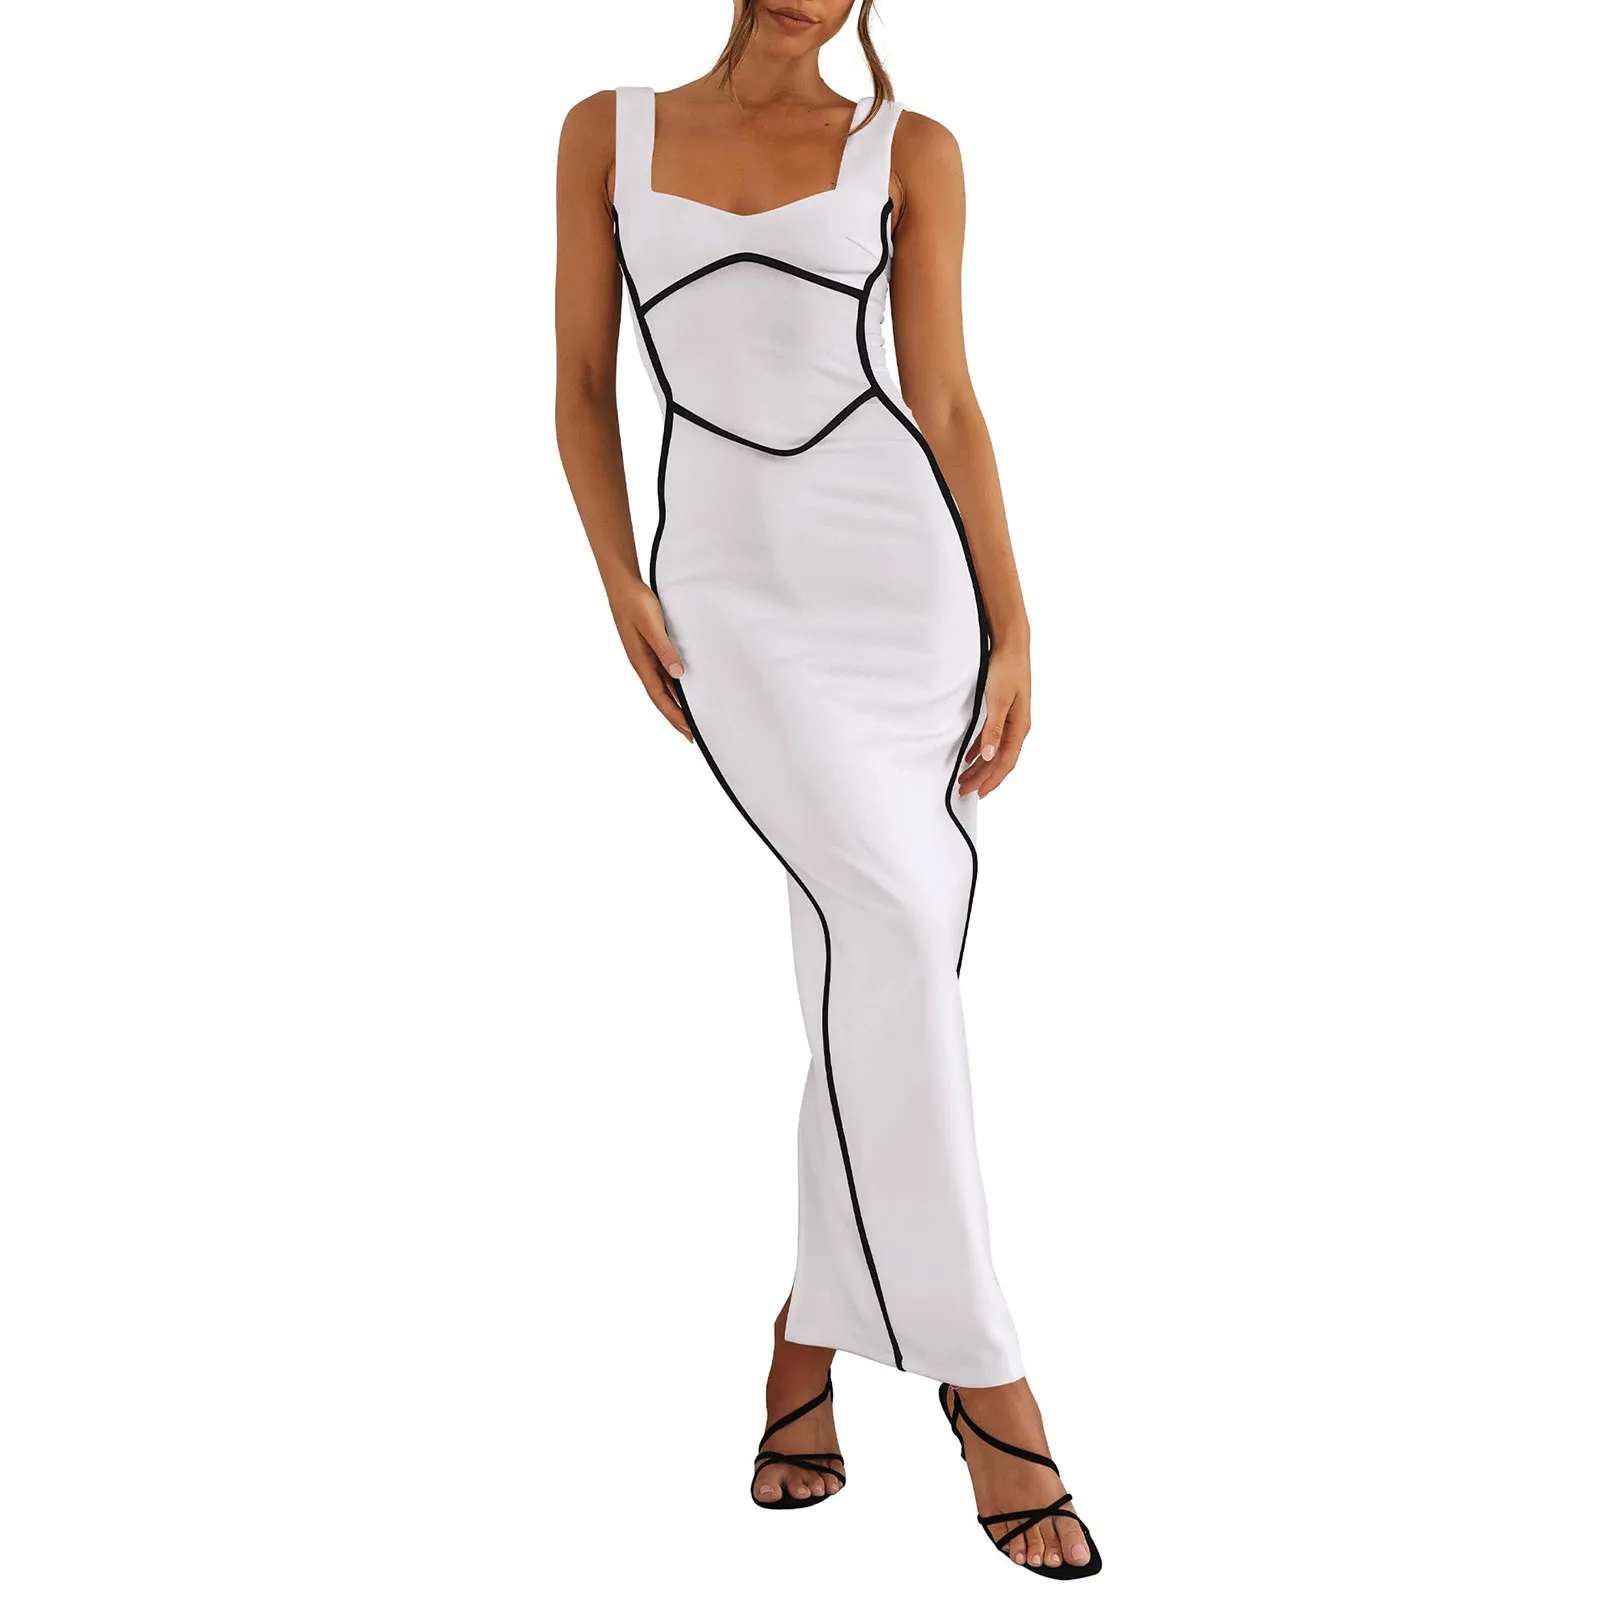 

Women'S New Long Dress Fashion Sexy Solid Color Sleeveless Strapless Dress Causal Daily Skinny Slim Fit Zipper Slit Dress